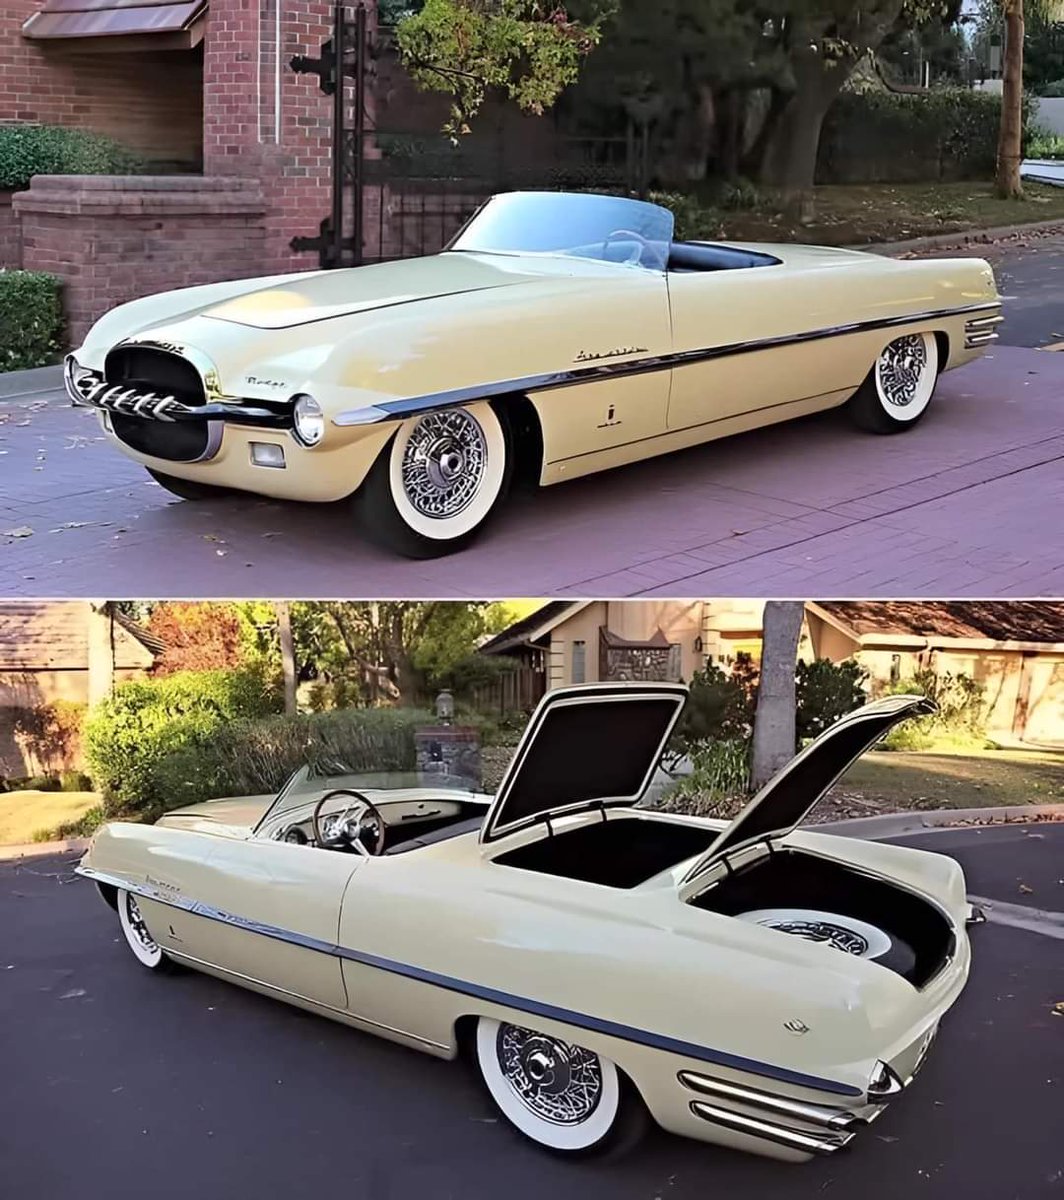 #ToplessTuesday !! 👙 ❤️ 🔥

The 1954 Dodge fire arrow.